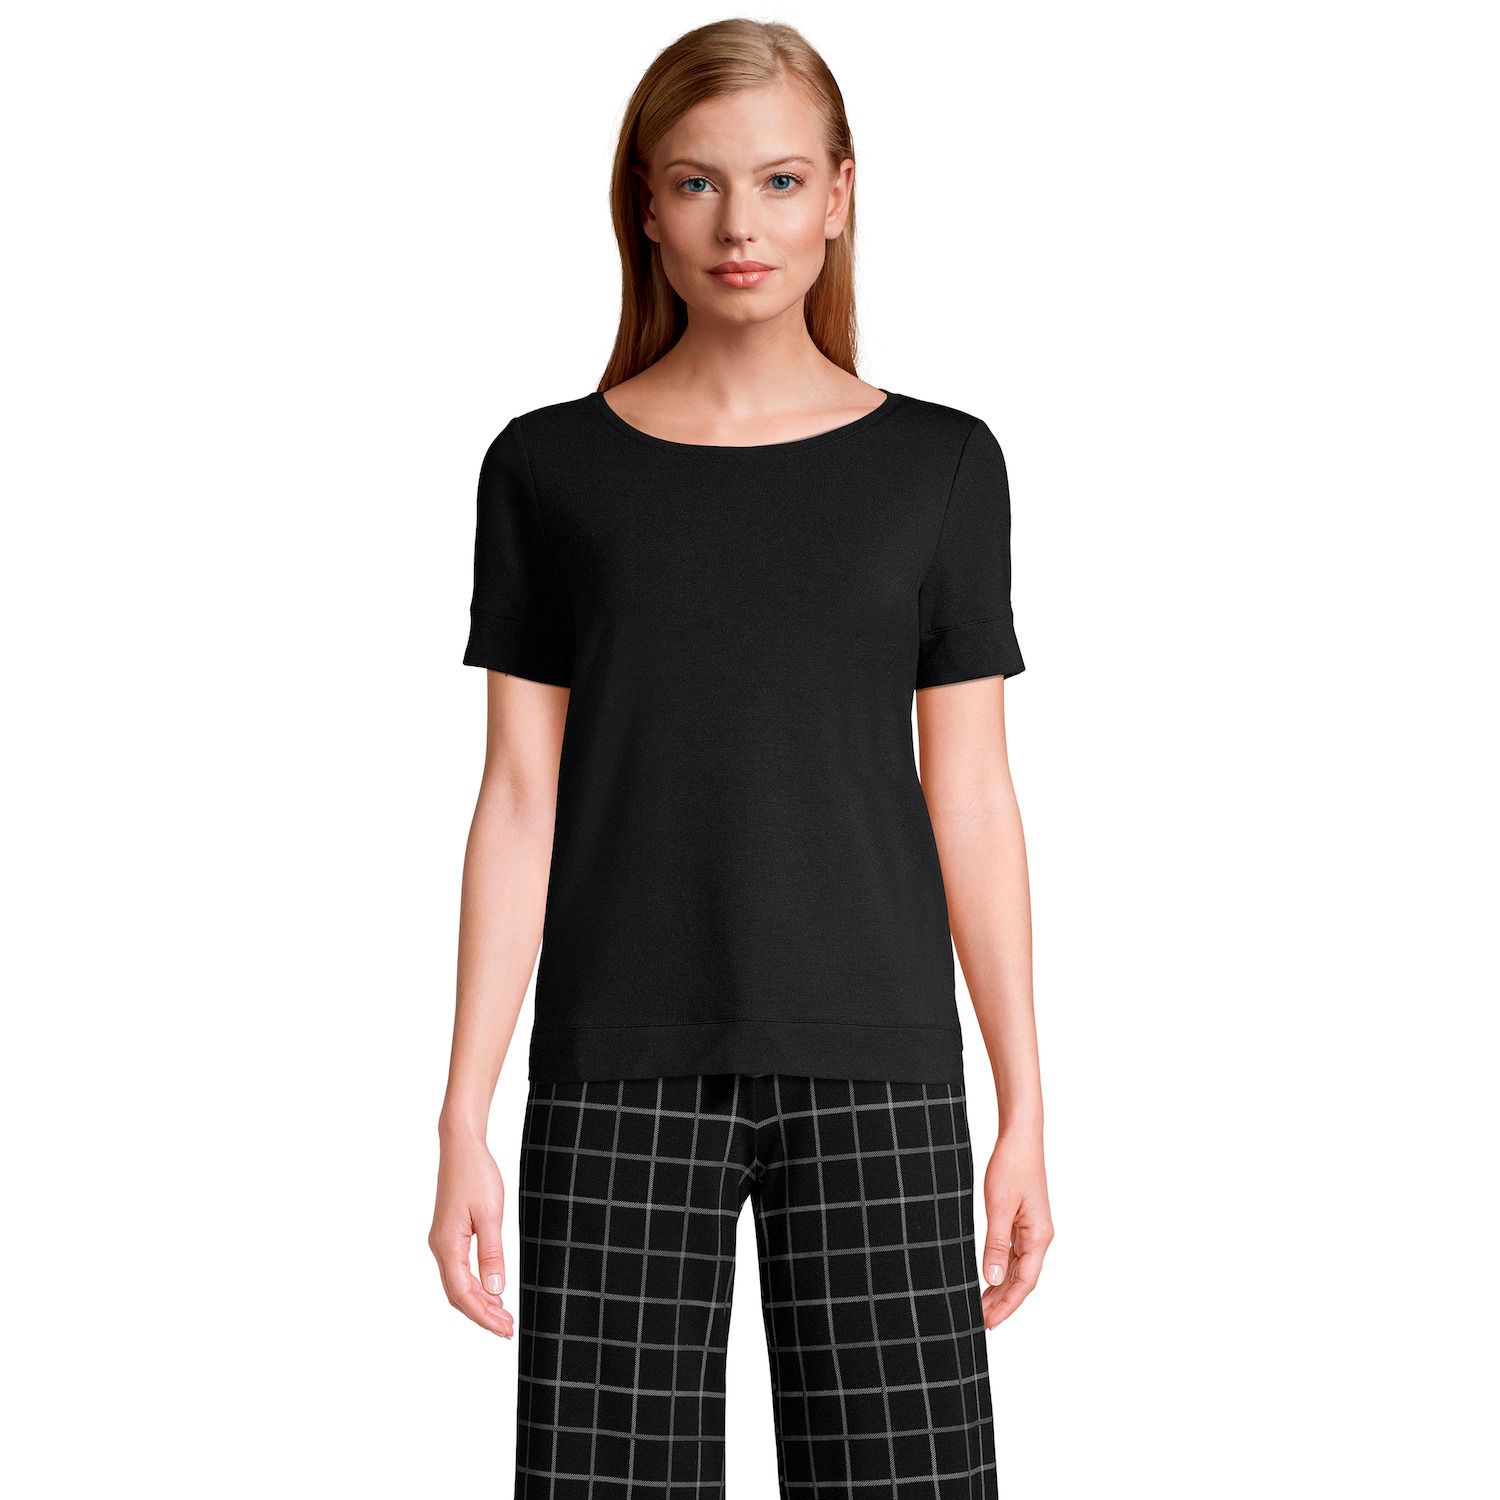 Image for Lands' End Women's Short Sleeve Pajama Tee at Kohl's.